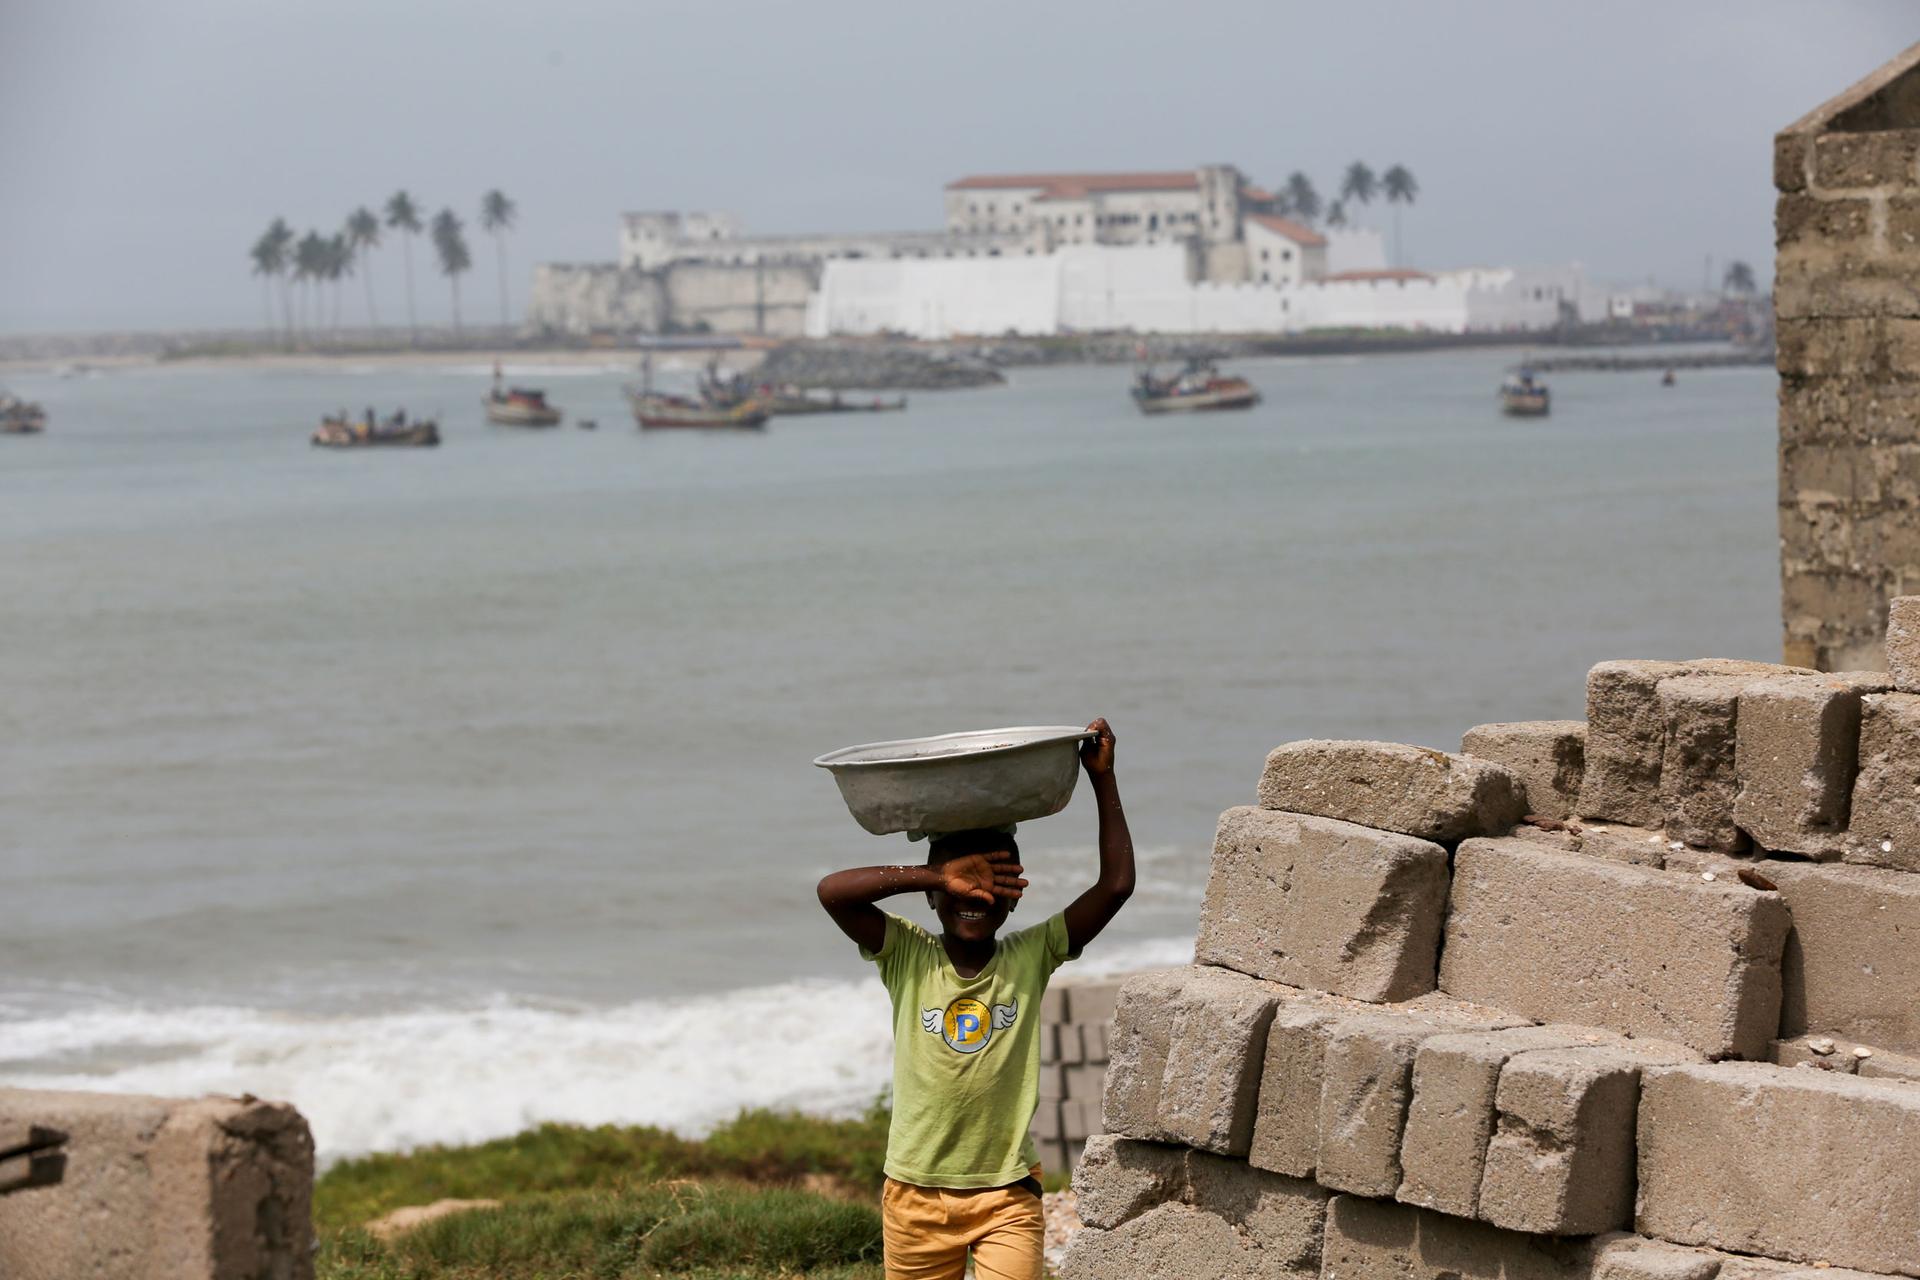 A young boy is shown in the nearground holding a large pan on his head with the ocean and Elmin Castle in the background.